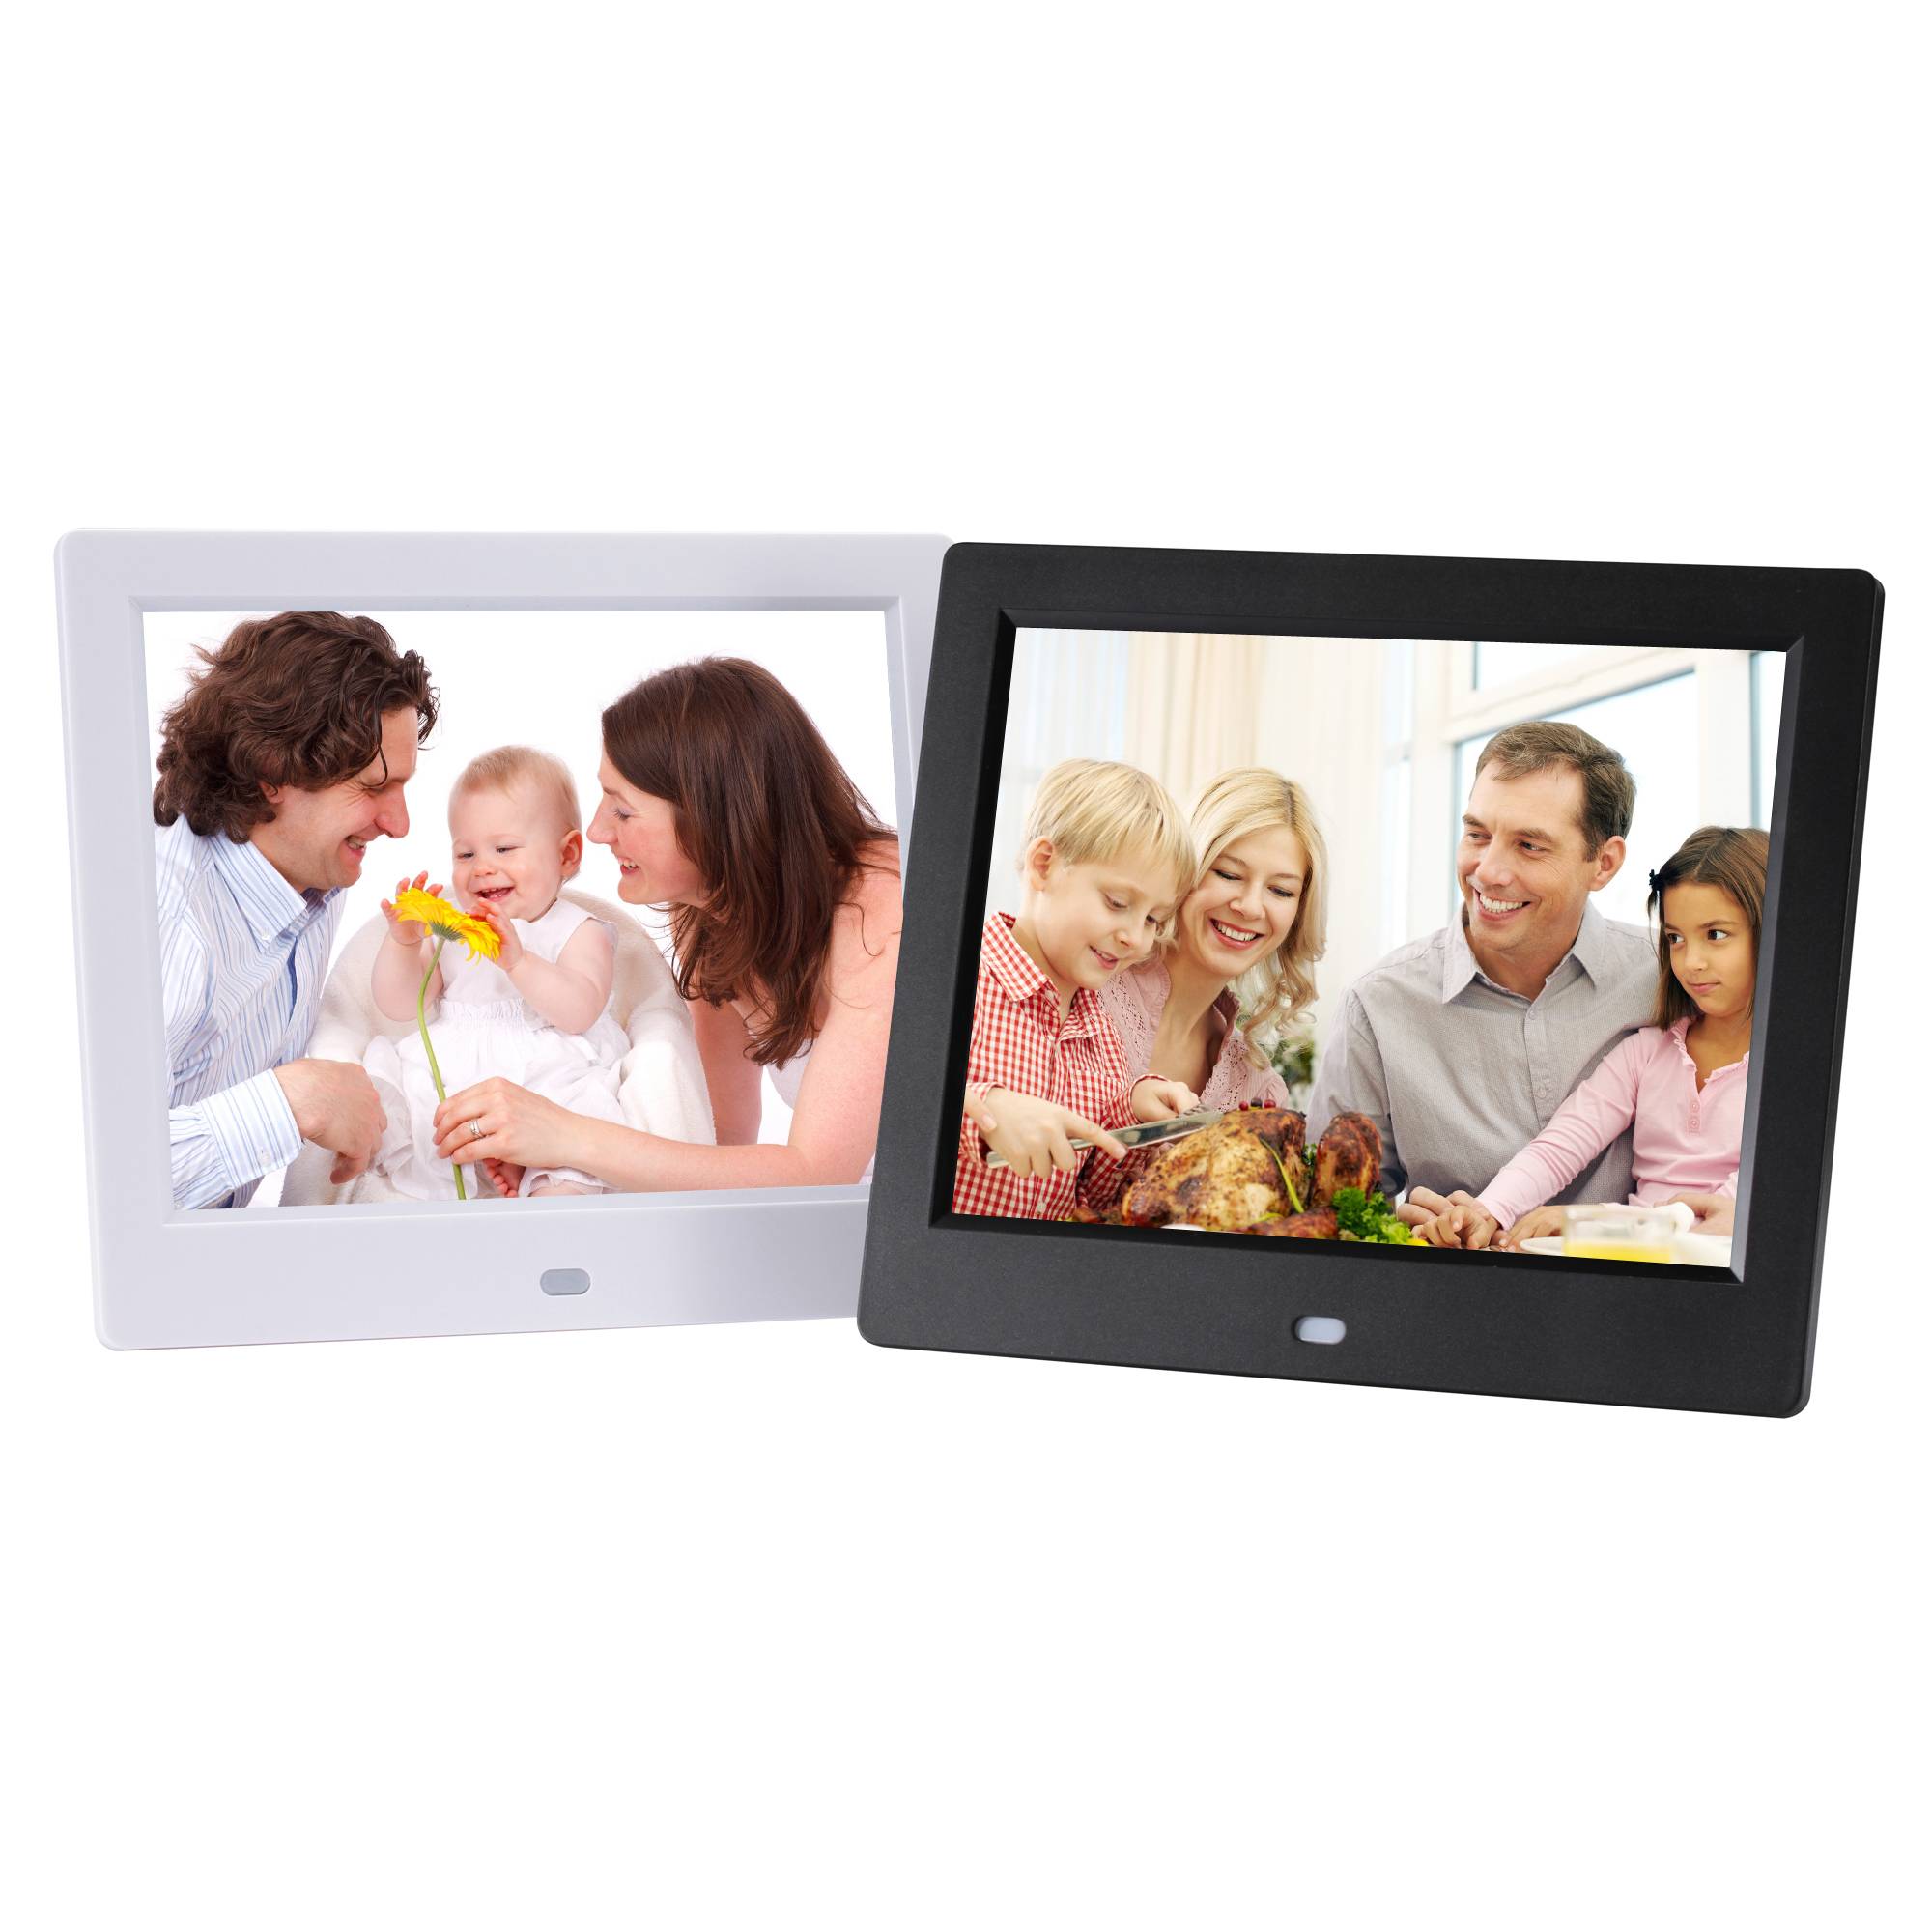 Discount Price 10.1inch Mediatek Tablet Pc - 8 inch slideshow cheap video player digital picture frame digital photo frame commercial advertising HD support 720P – Idealway